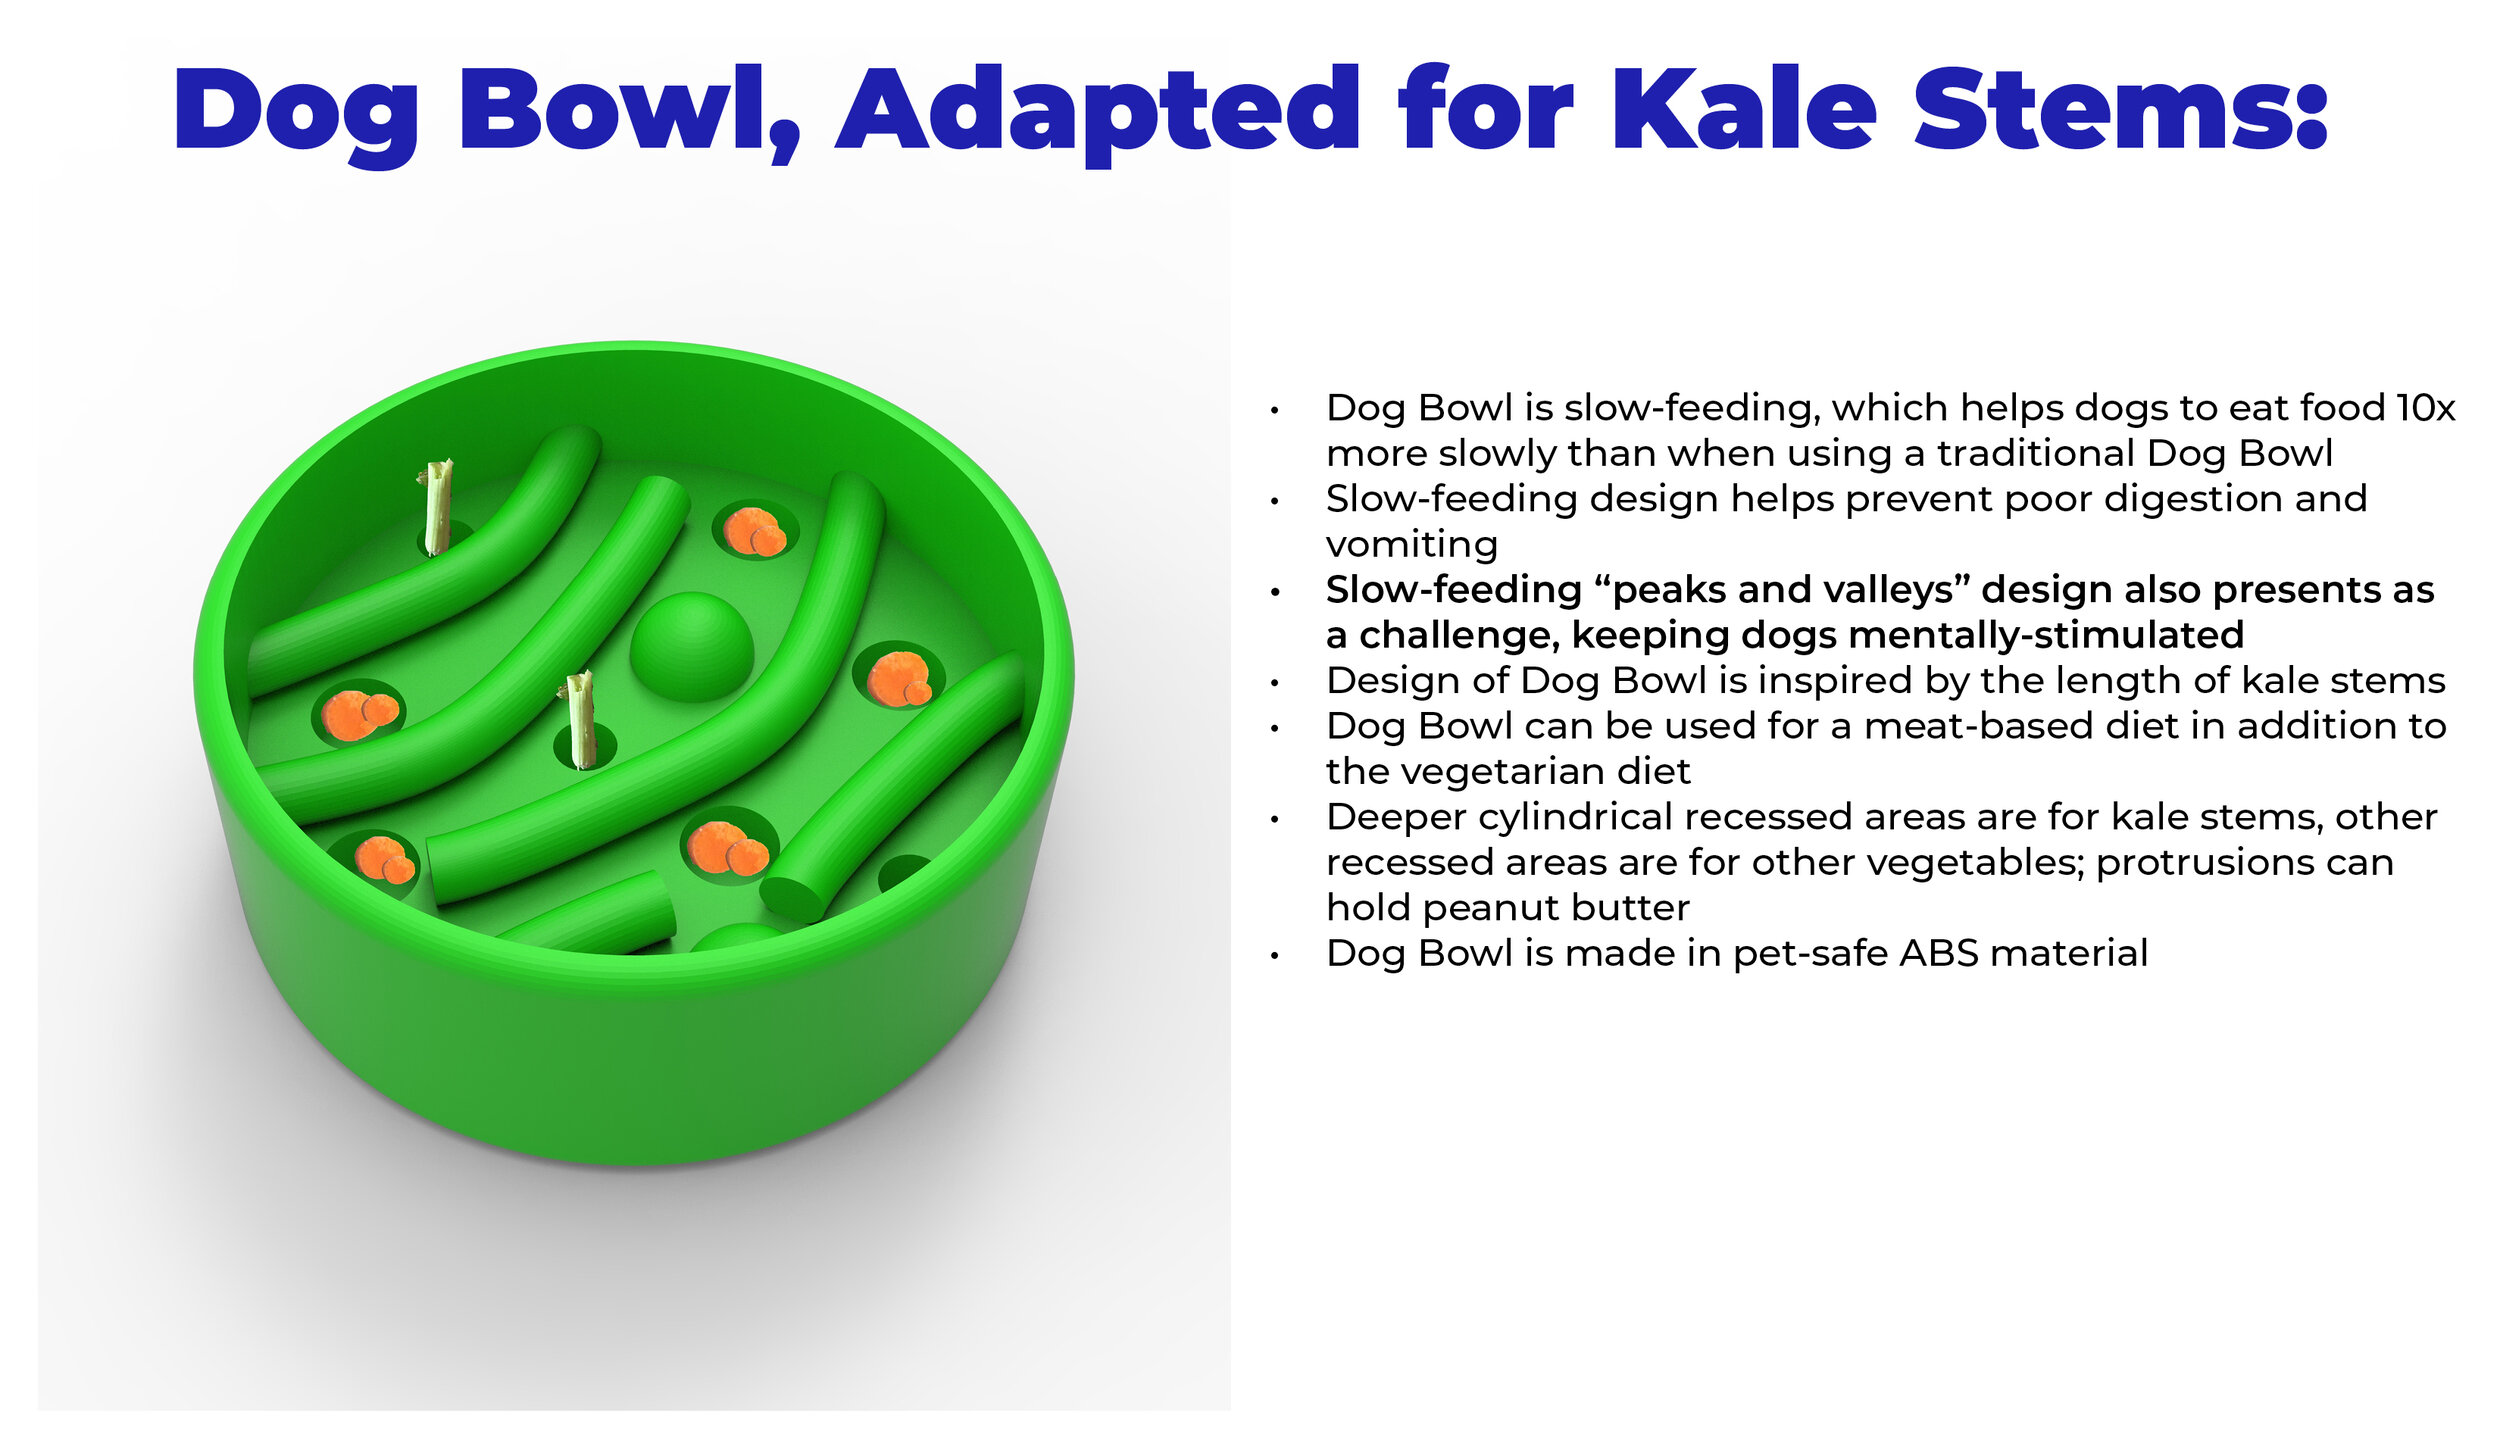 Dog Bowl, Adapted for Kale Stems, Final Rendering